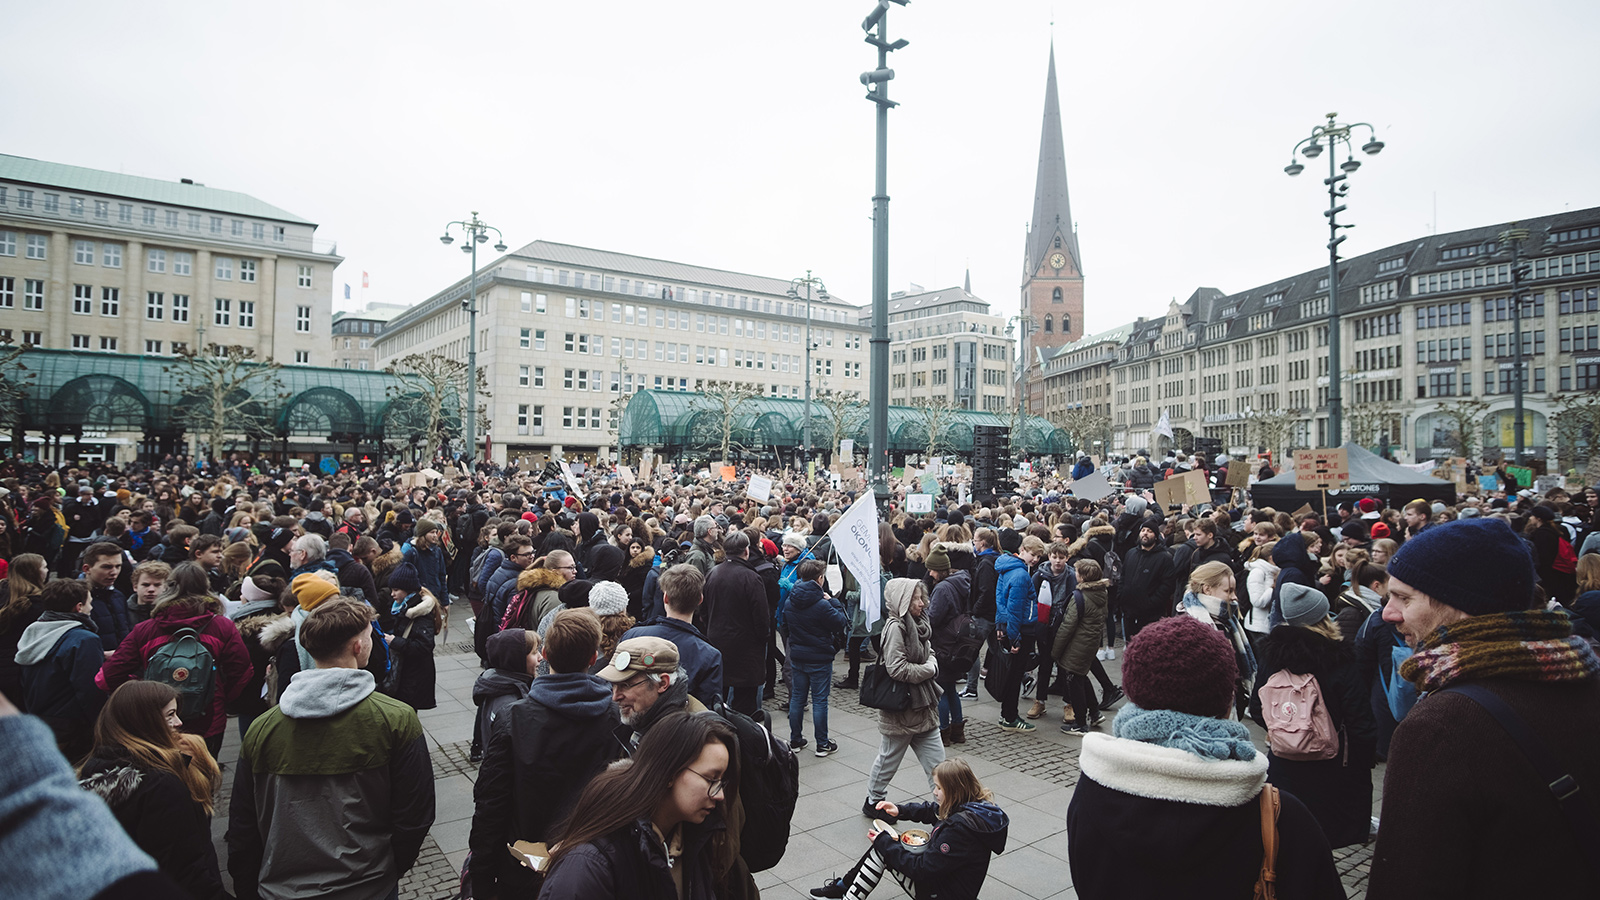 ecosia-joins-climate-strike-march-fridays-for-the-future-greta-thunberg-5